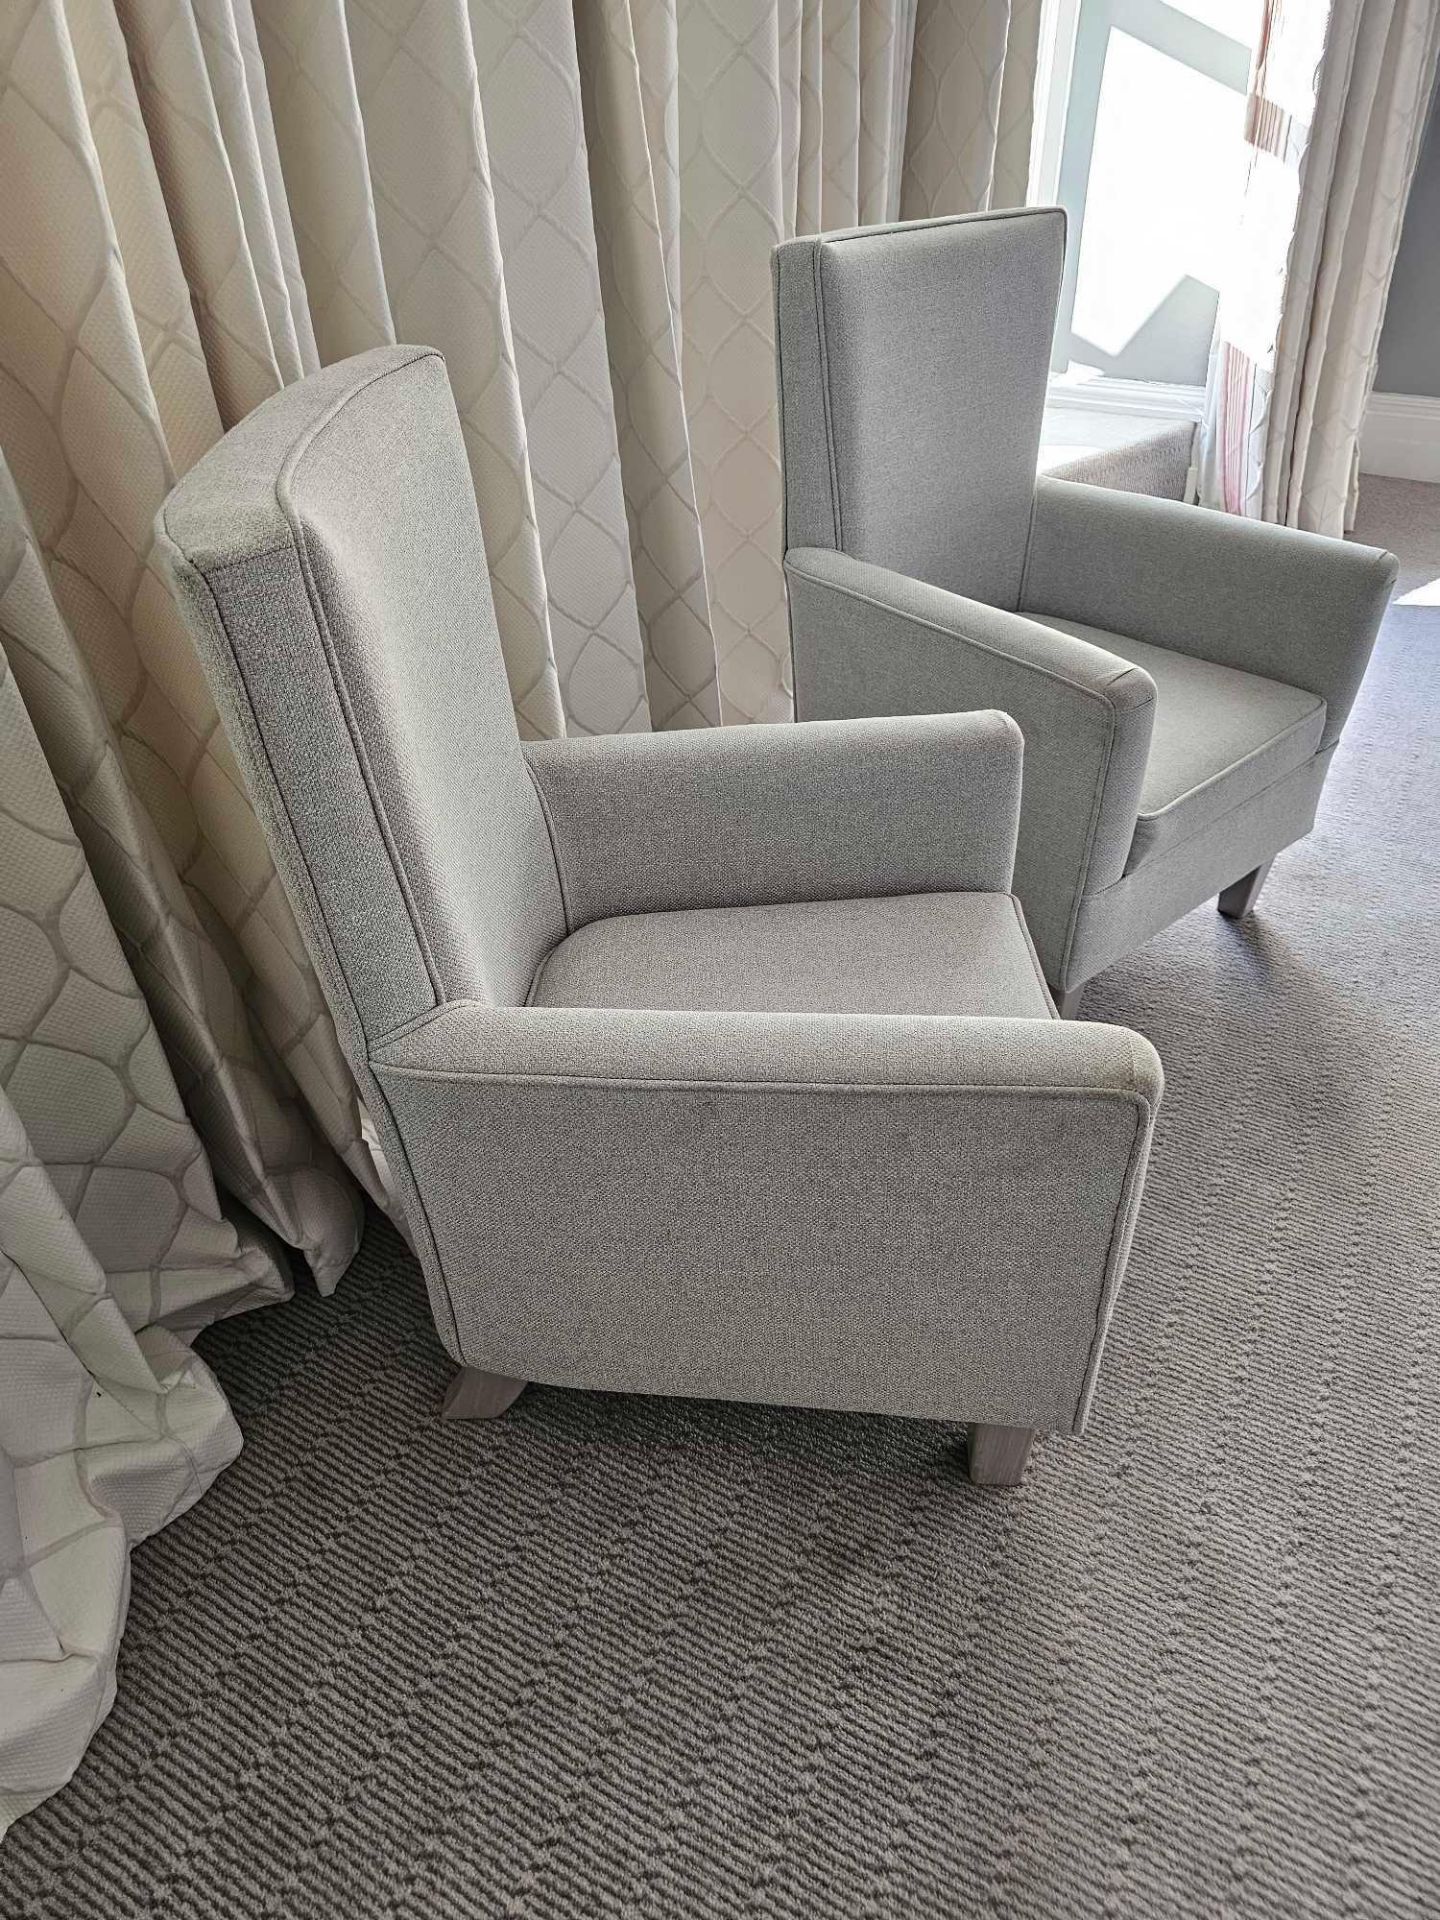 A Pair Of Accent Chairs The Contemporary Accent Chair With Simple Silhouette And Hardwood Frame - Bild 2 aus 2